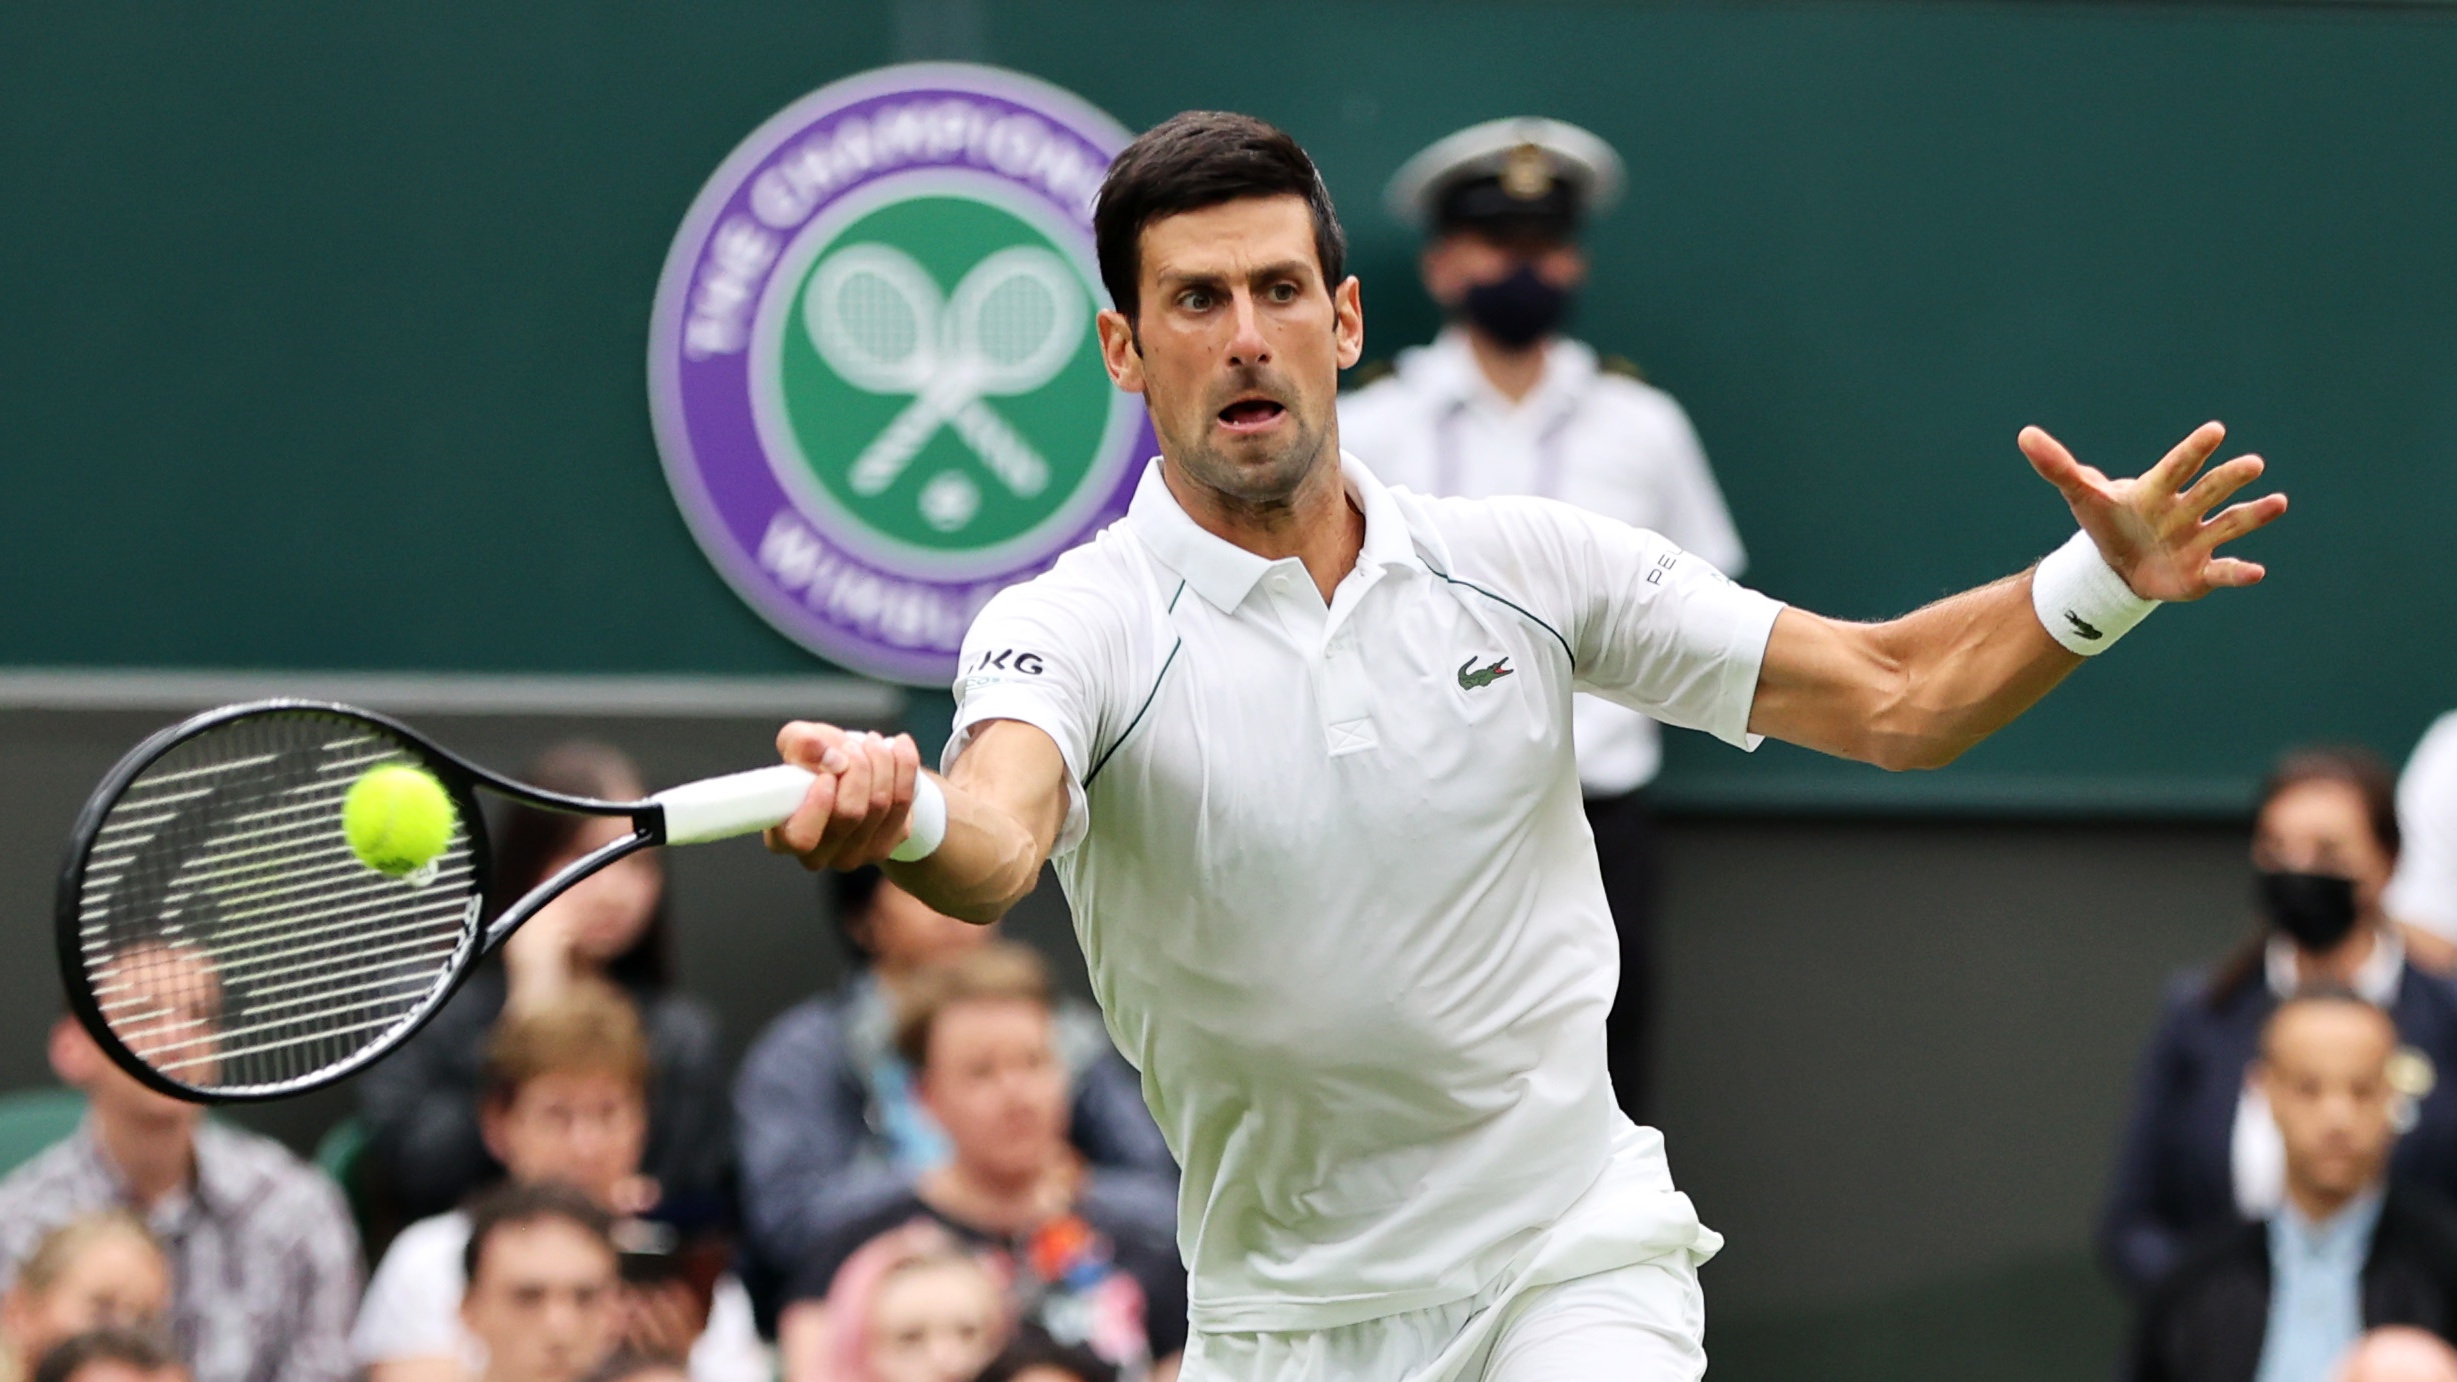 2022 Wimbledon live streams How to watch Djokovic vs Kyrgios in the Mens Final online and free Toms Guide